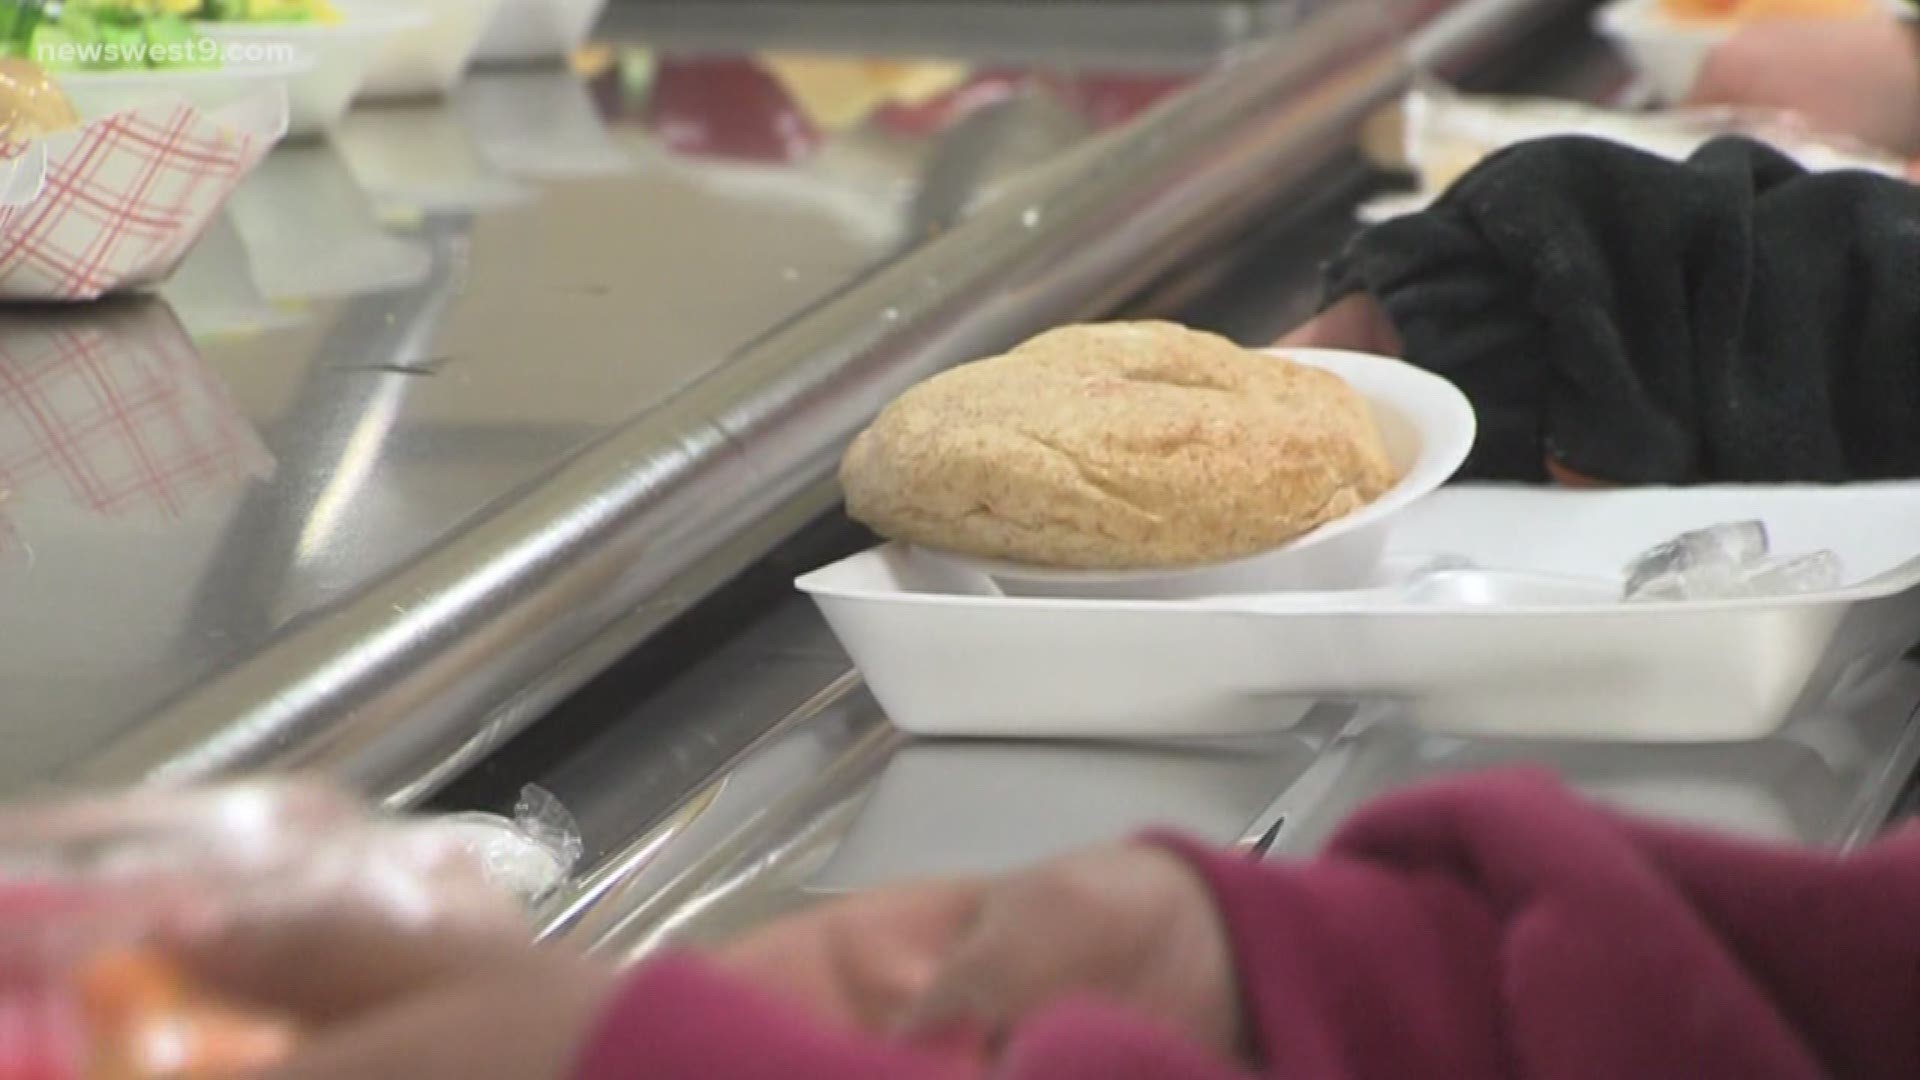 Funding for the all breakfast and lunch meals served at ECISD schools will come from two USDA programs.